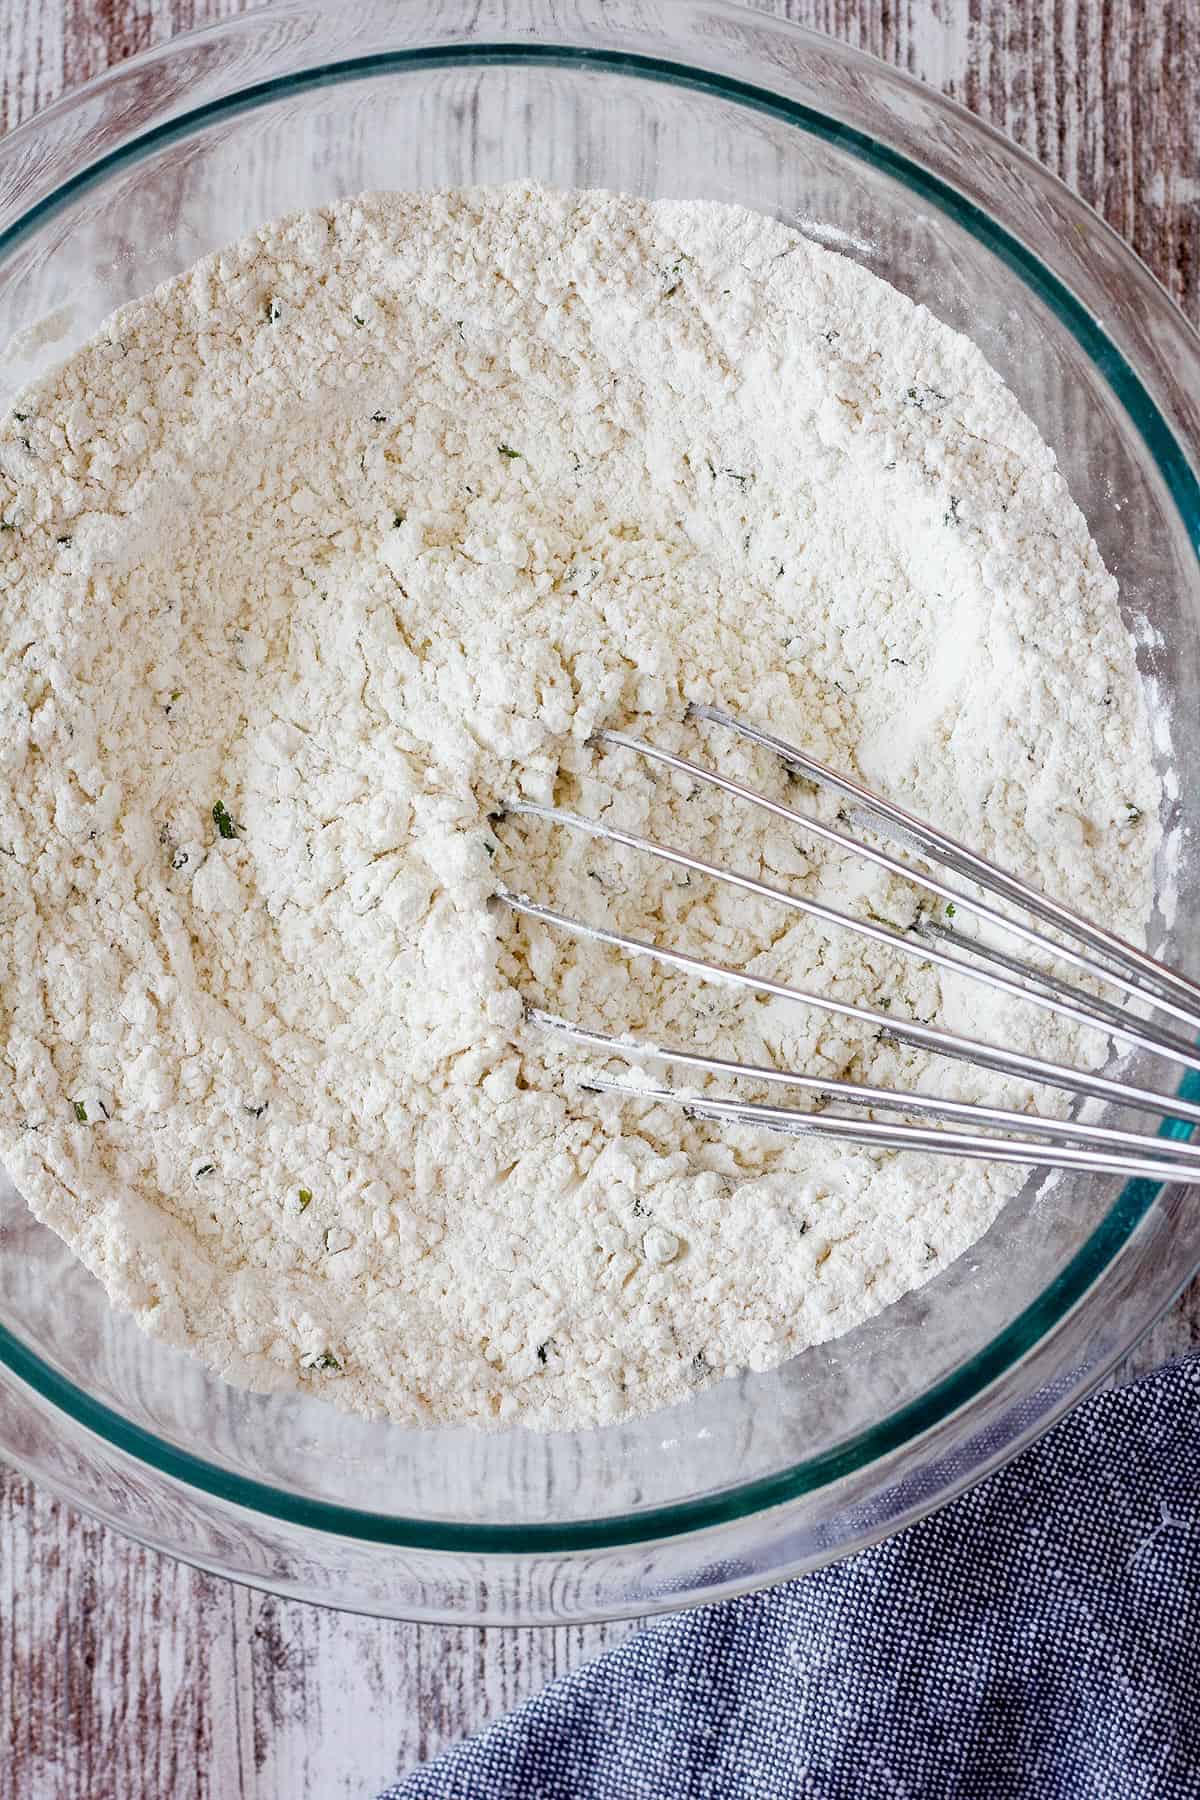 Combined dry ingredients in a bowl with a whisk.